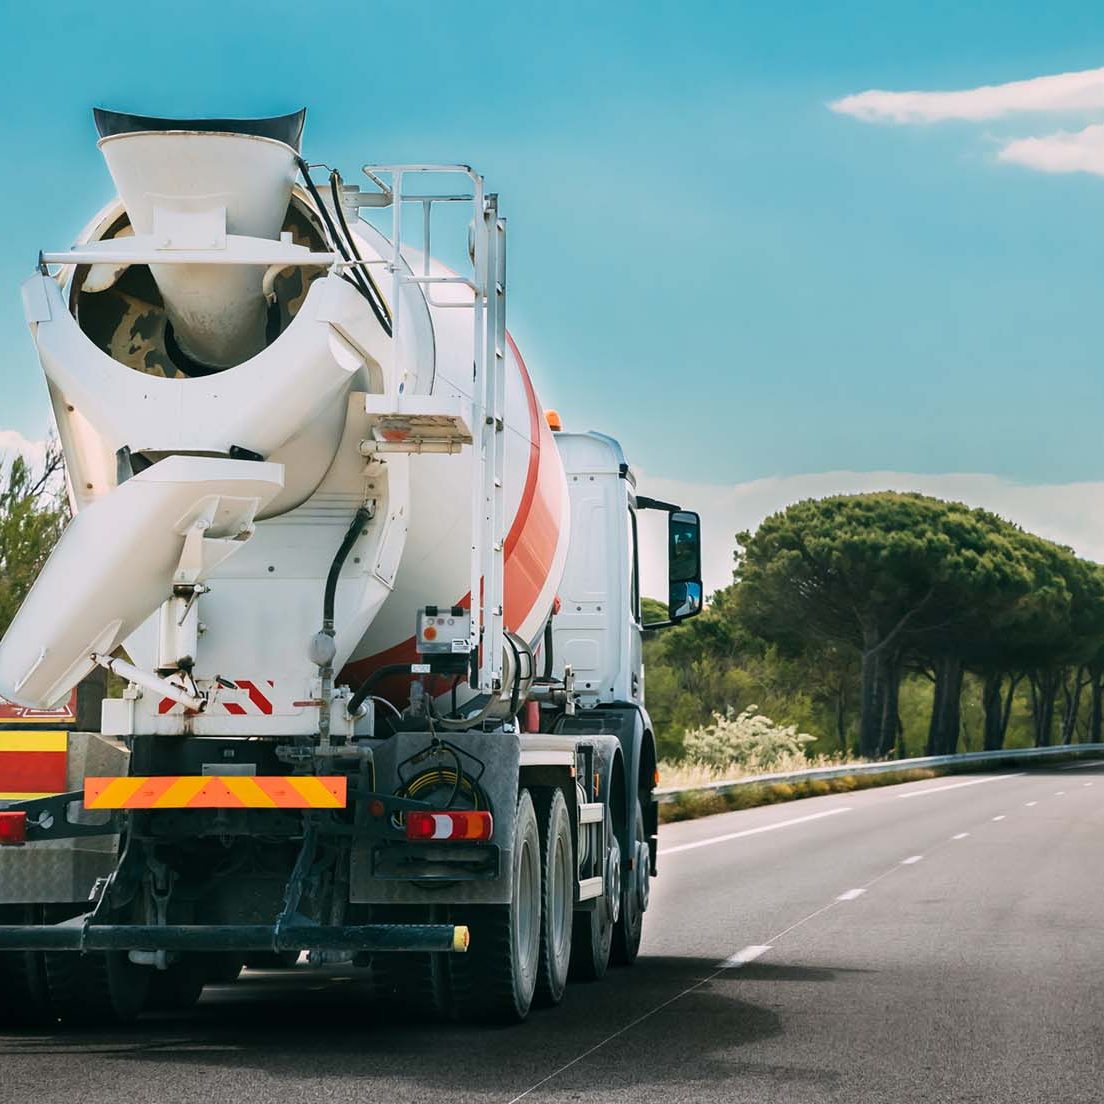 Special Concrete Transport Truck In-transit Mixer Unit In Motion On Country Road, Freeway. Freeway Motorway Highway. Business Drive Transportation And Development Concept. Concrete Truck Mixer